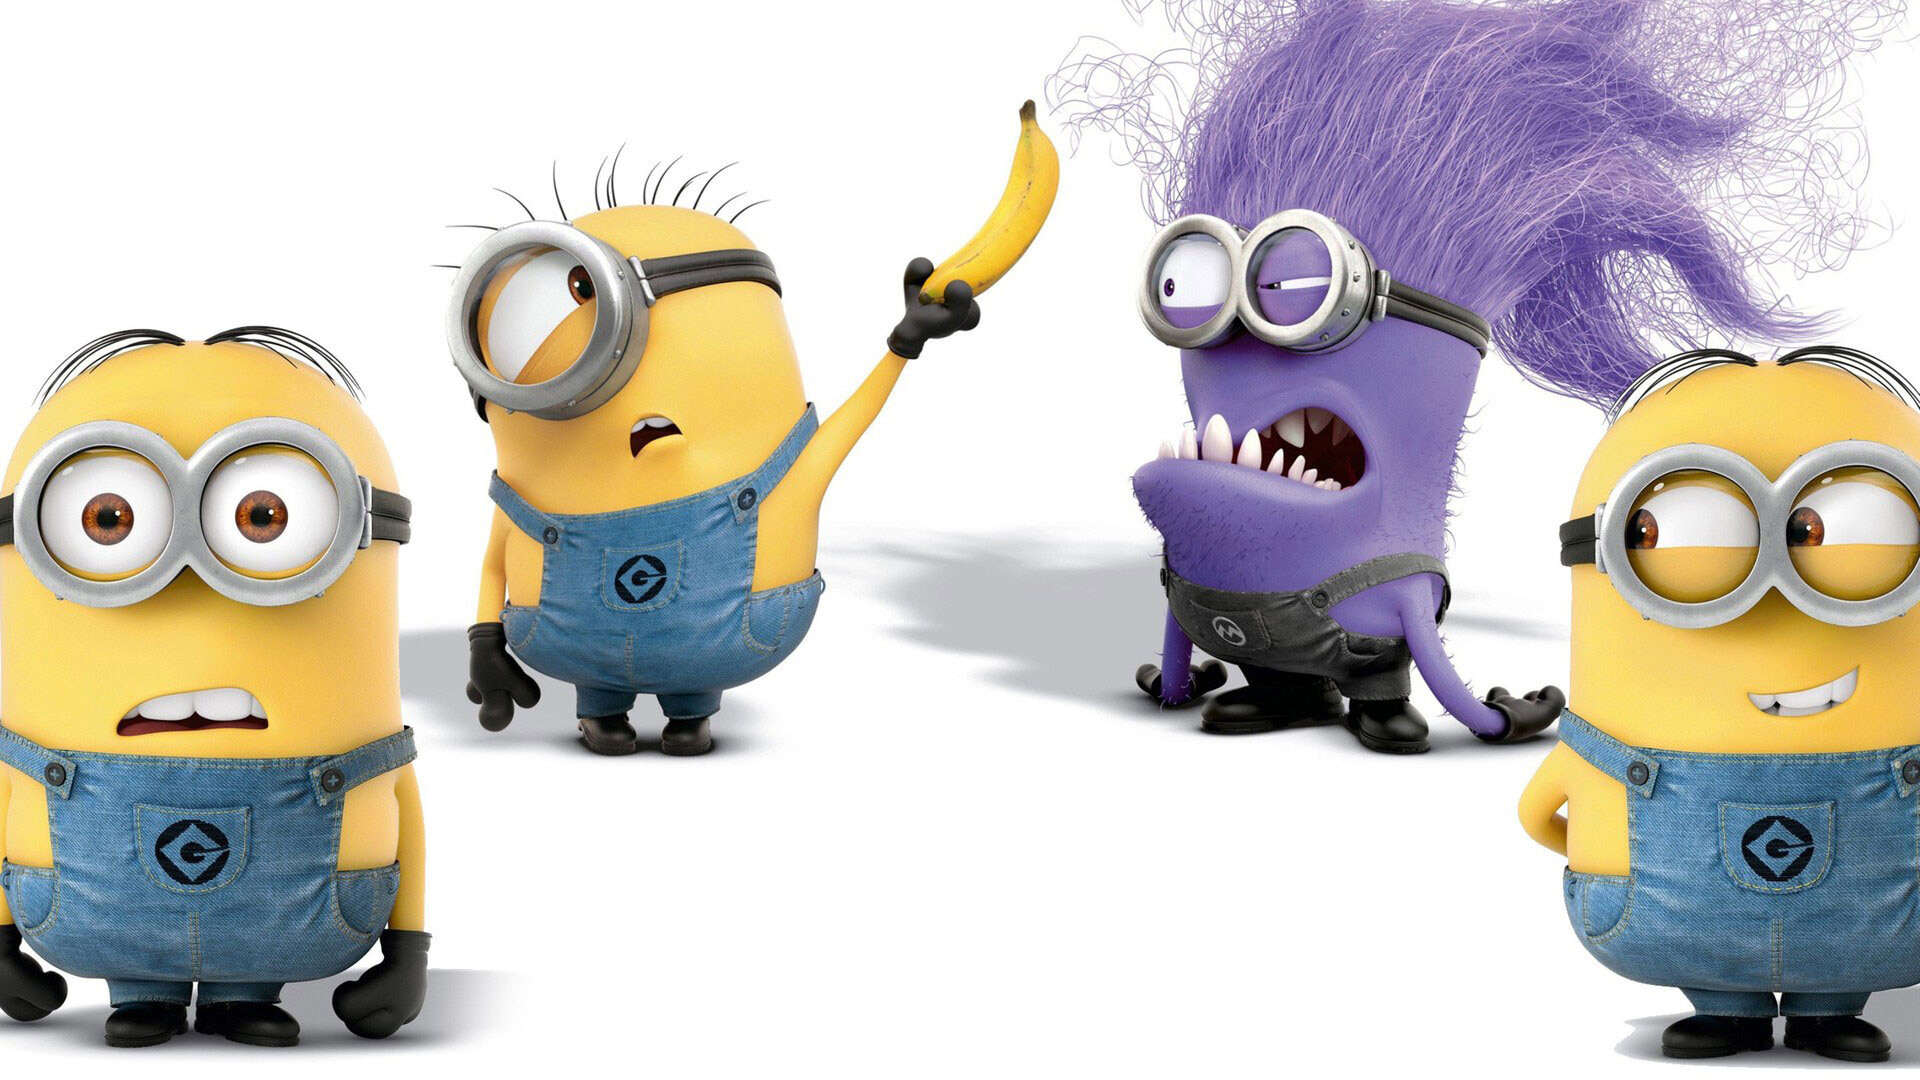 Despicable Me: Small yellow people, Minions, Produced by Illumination Entertainment. 1920x1080 Full HD Wallpaper.